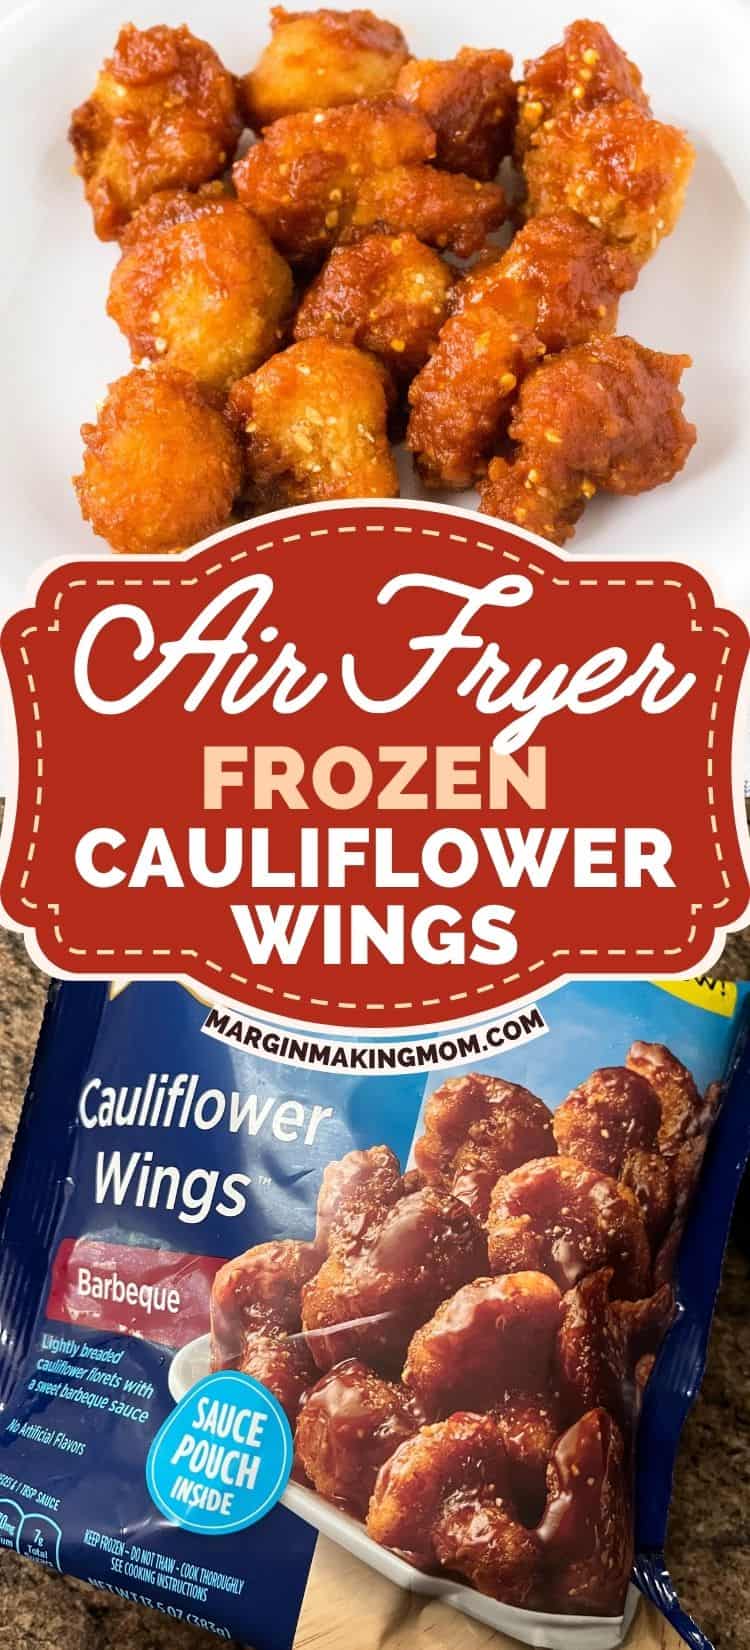 two photos; one shows a package of Birdseye frozen cauliflower wings, and the other shows cauliflower wings cooked in the air fryer served on a white plate